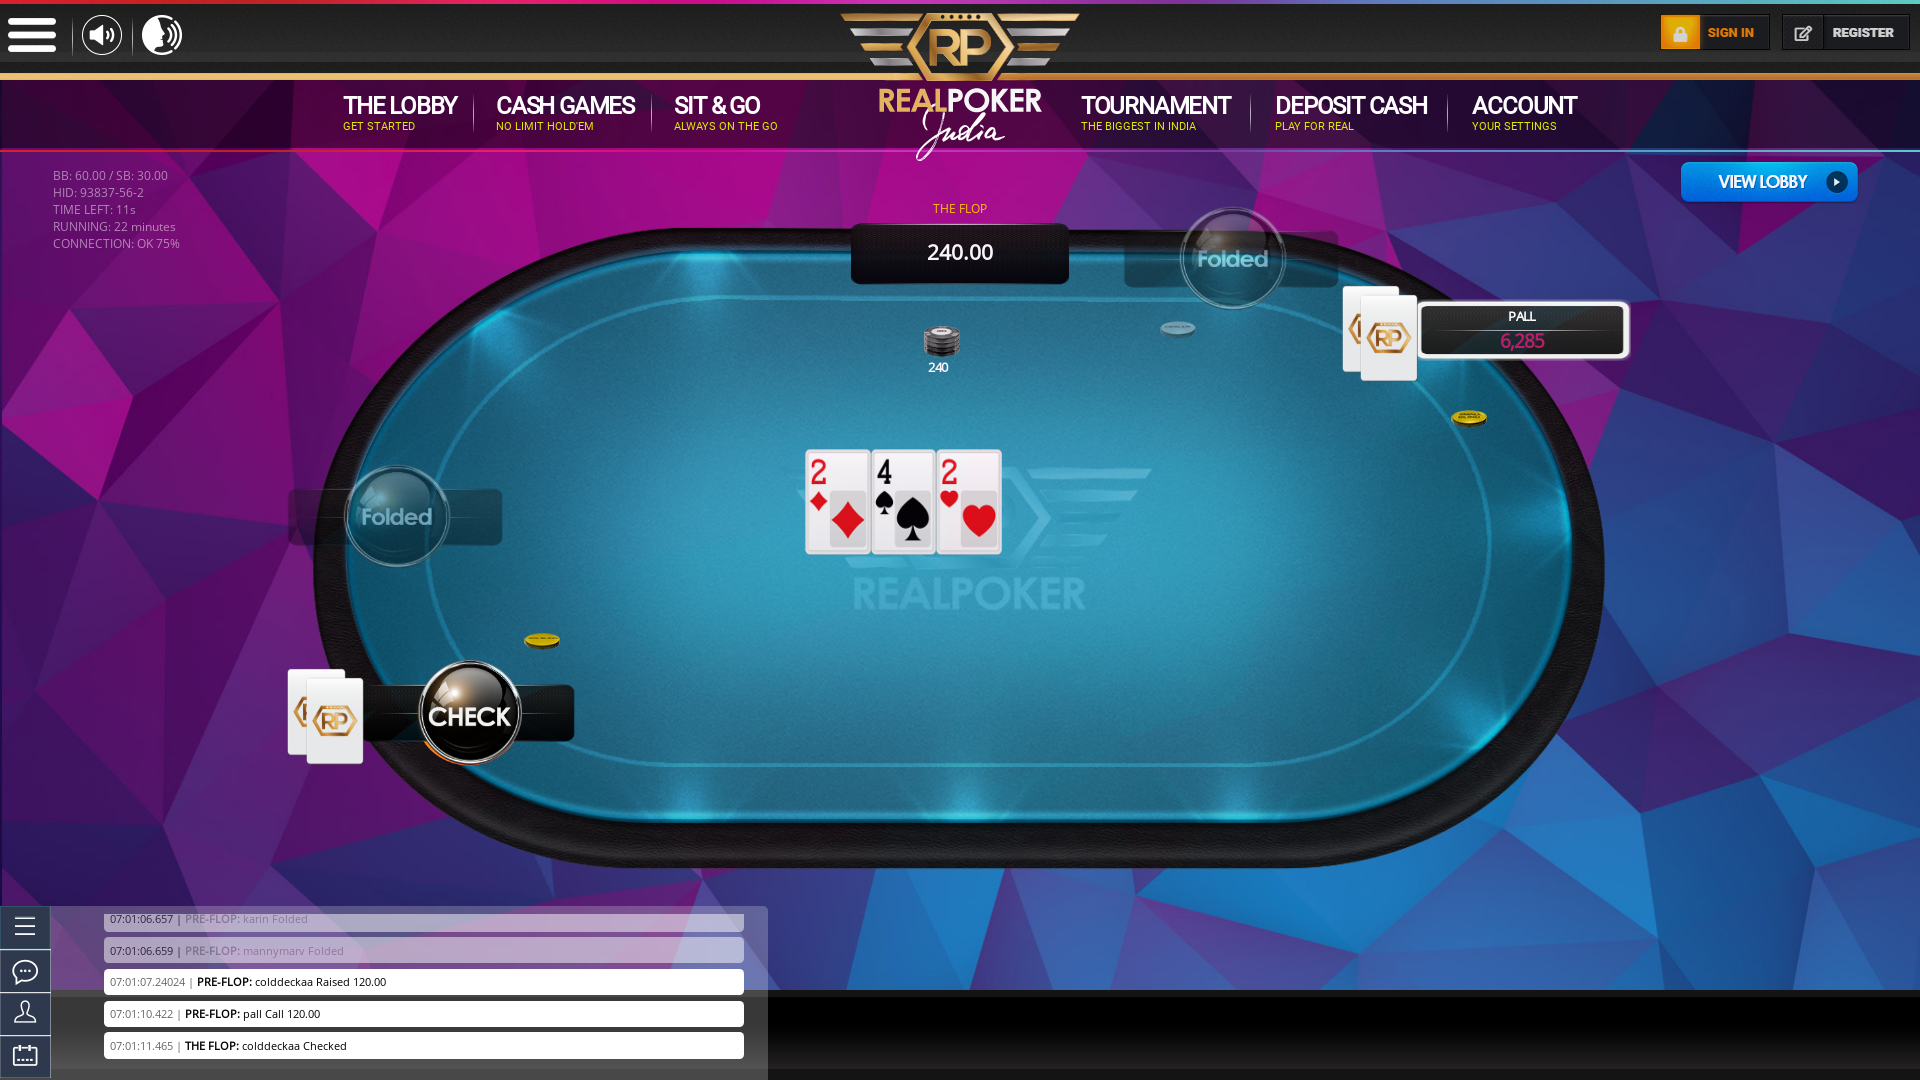 Real poker on a 10 player table in the 22nd minute of the game